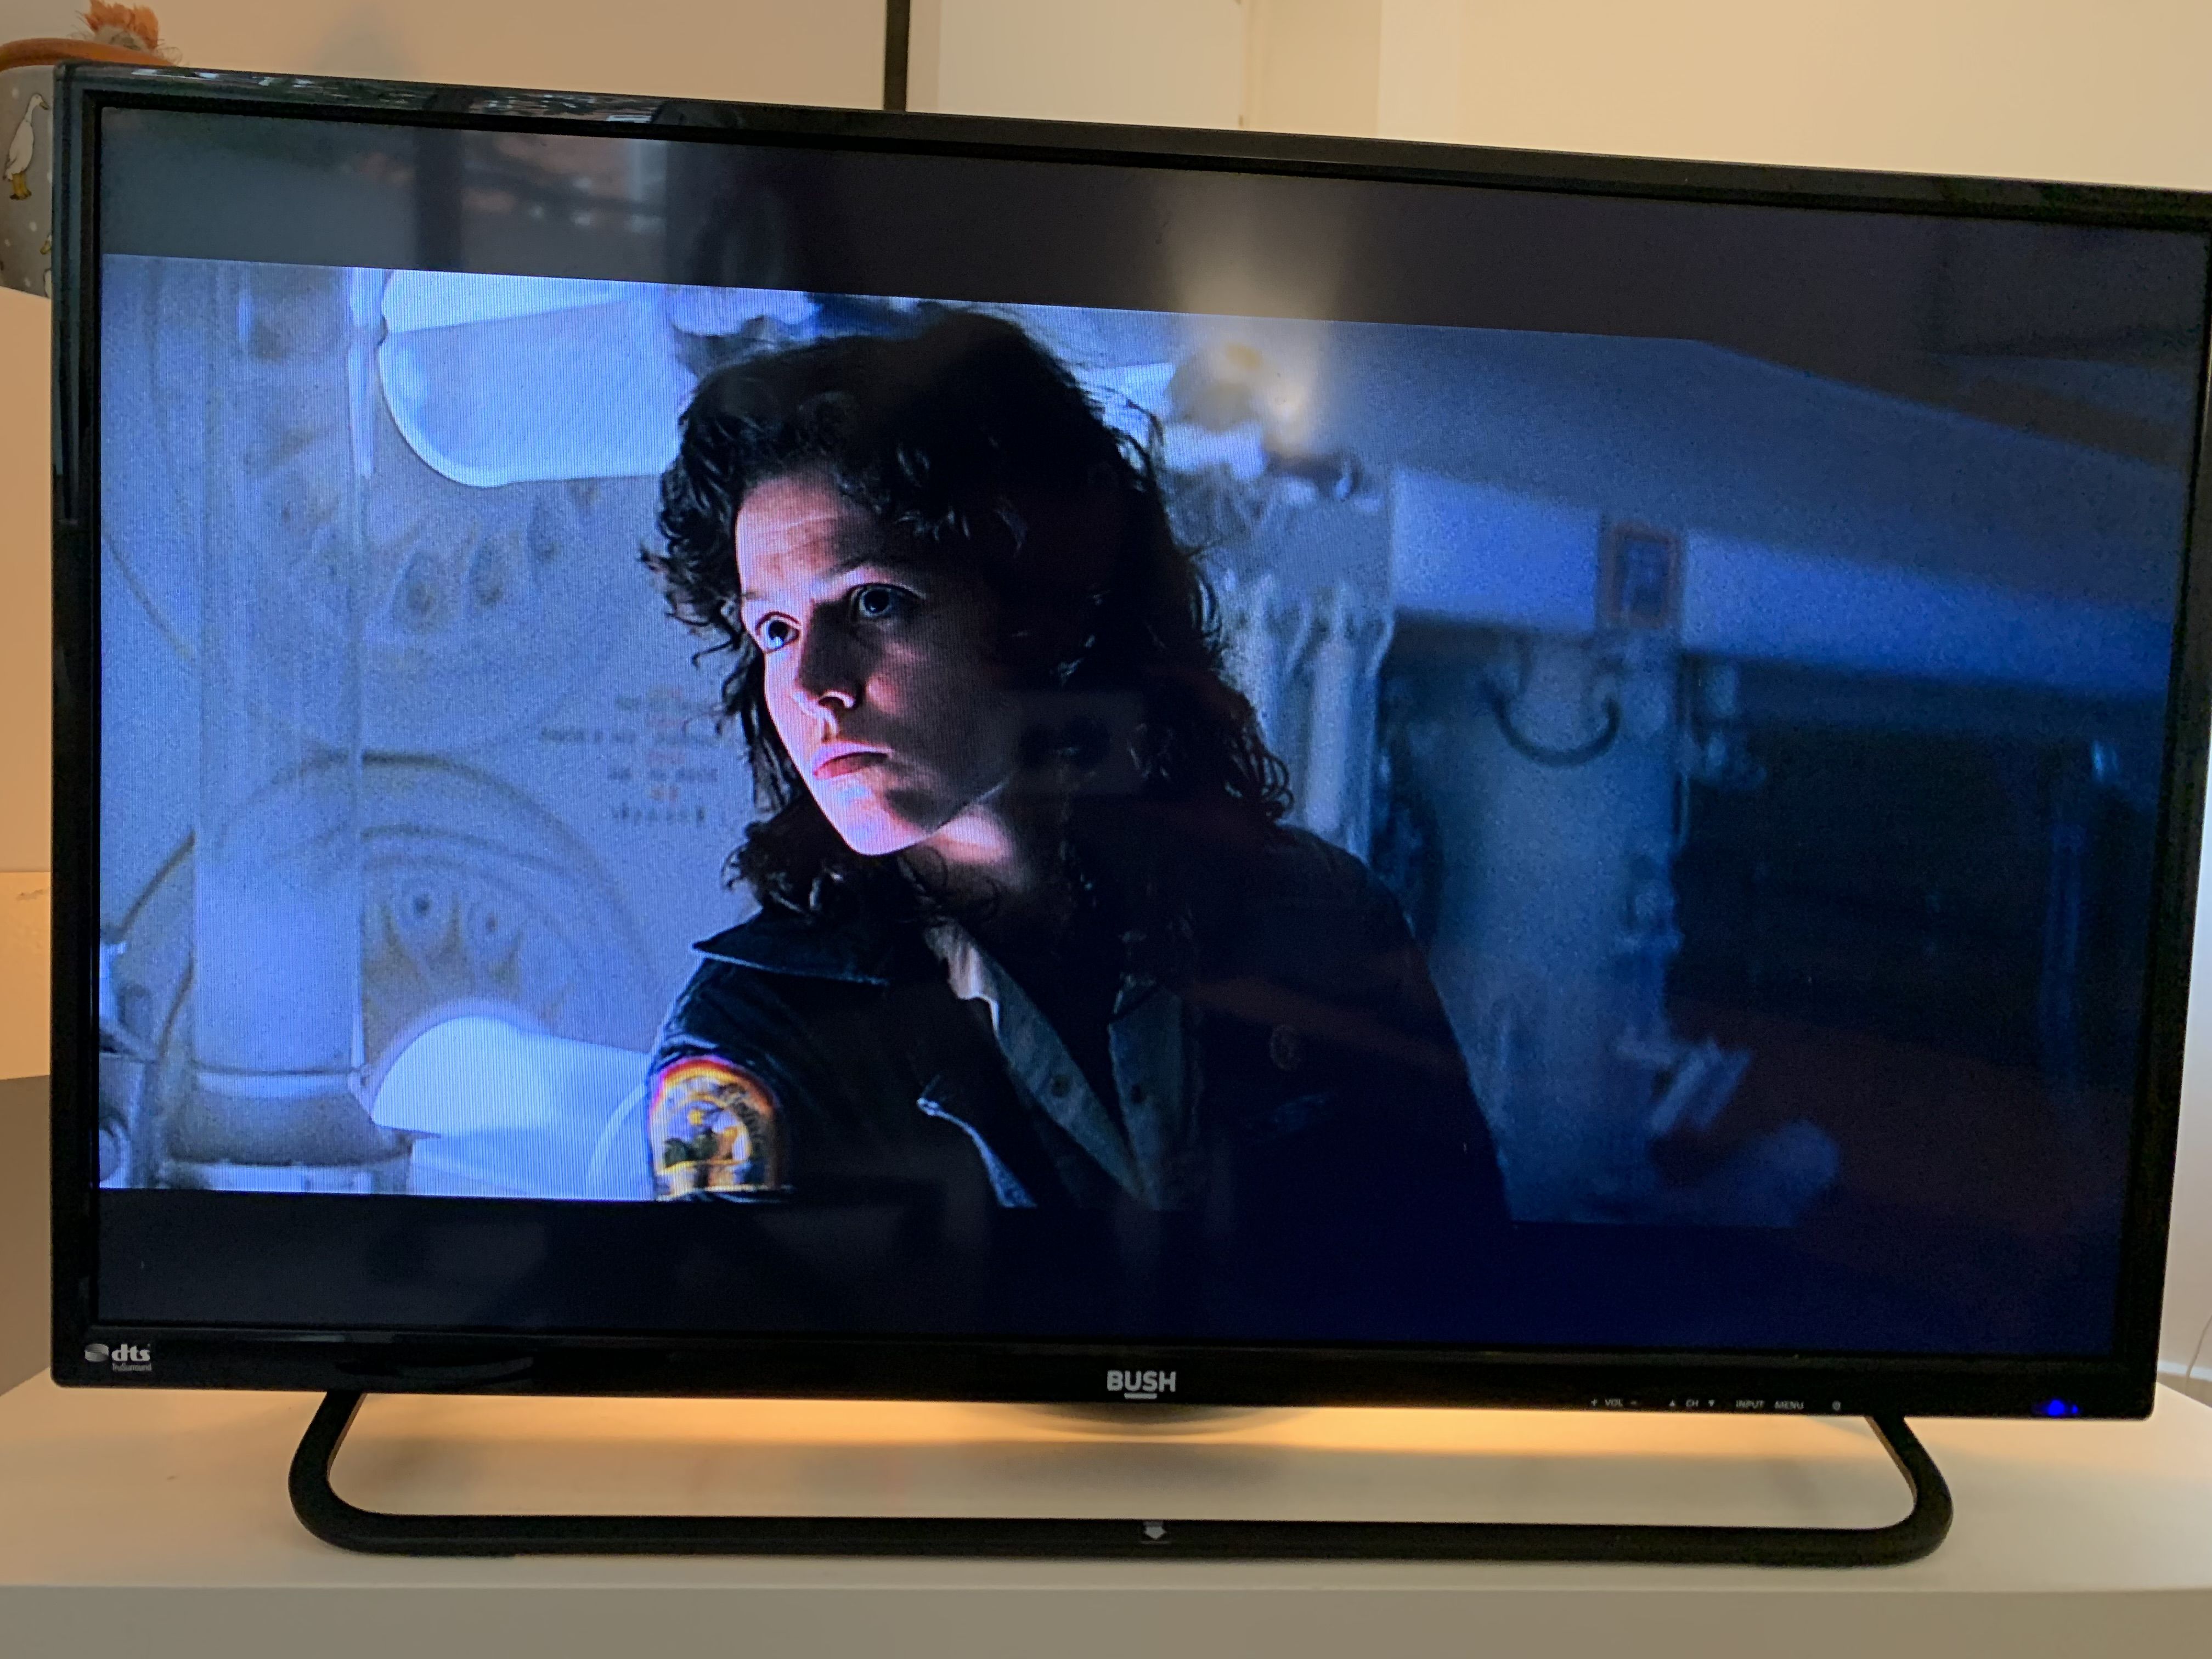 Watching a movie over wireless HDMI.